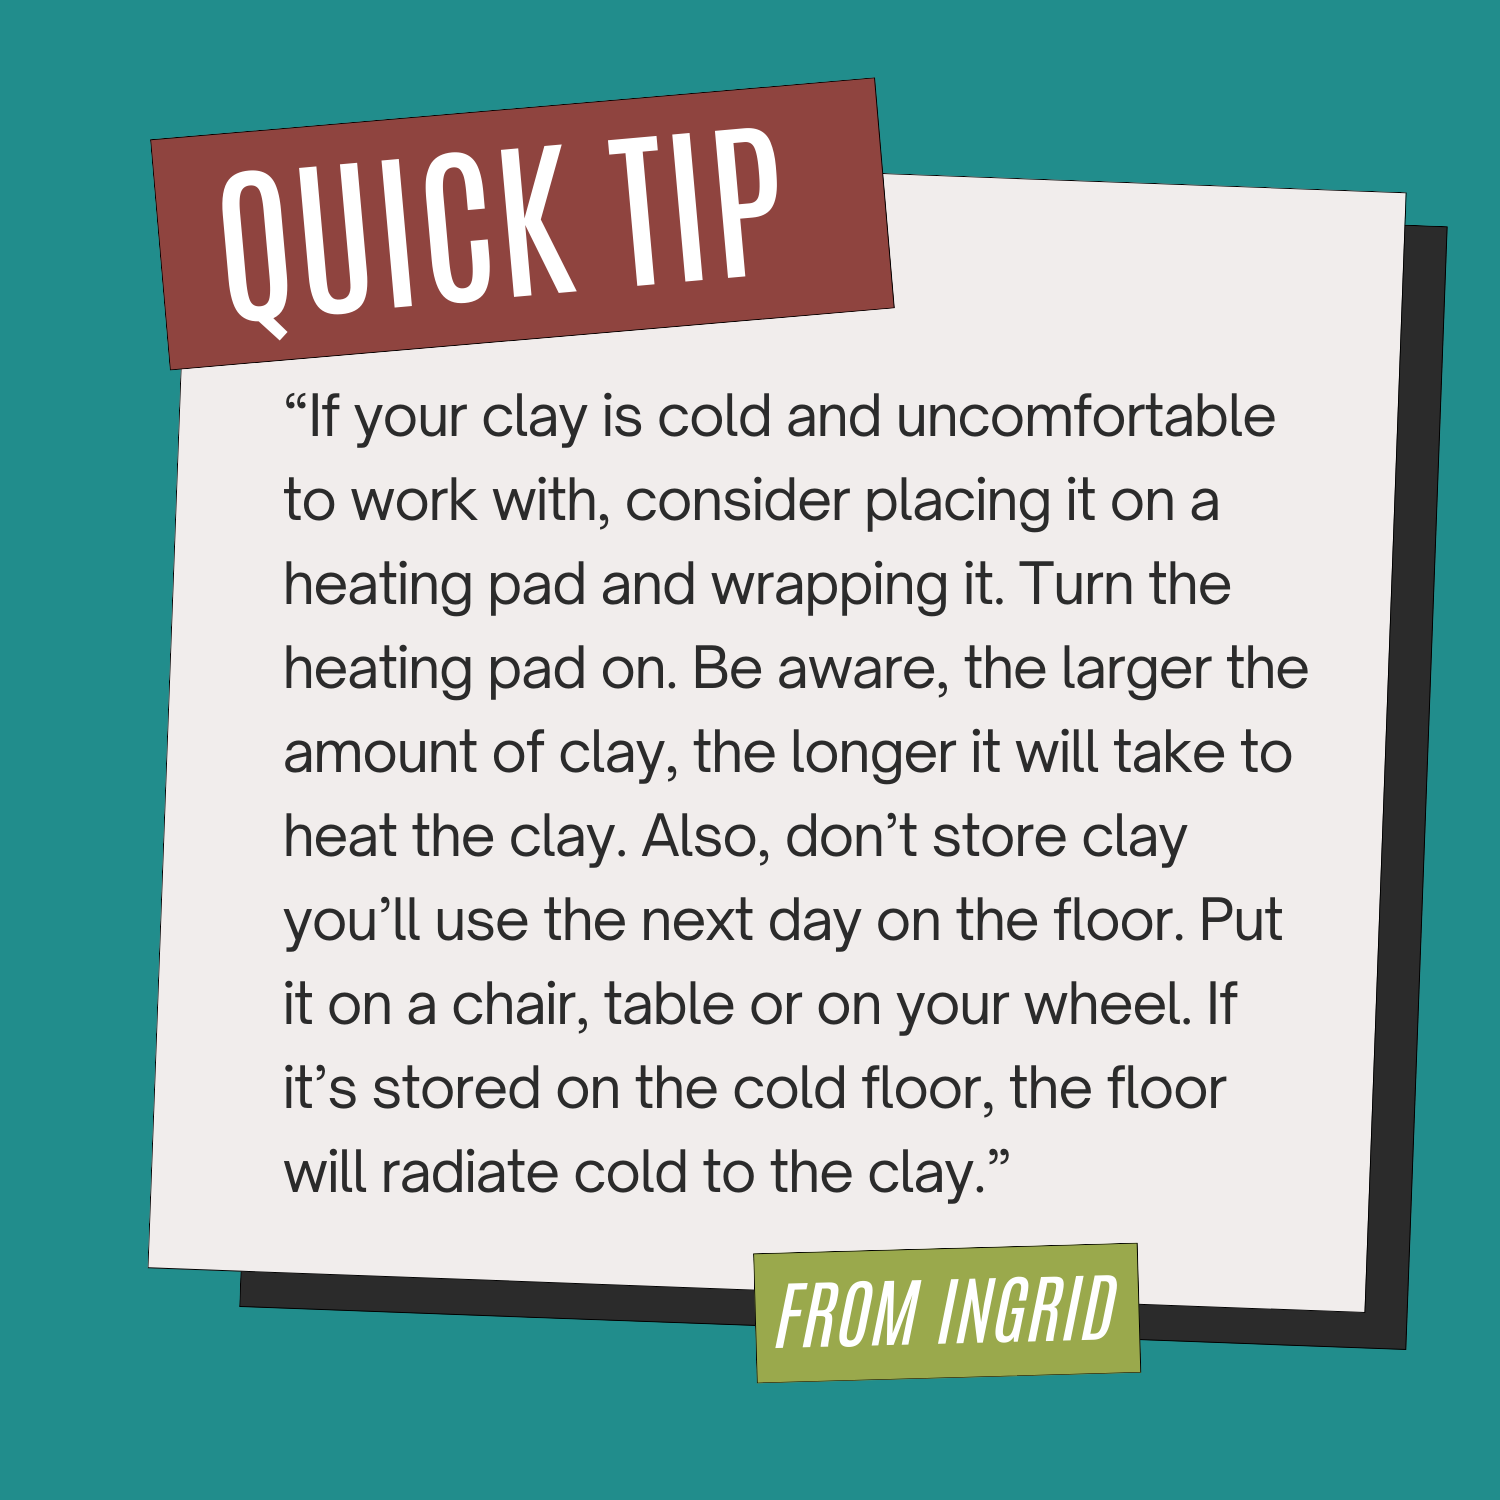 Ingrid's quick tip for March